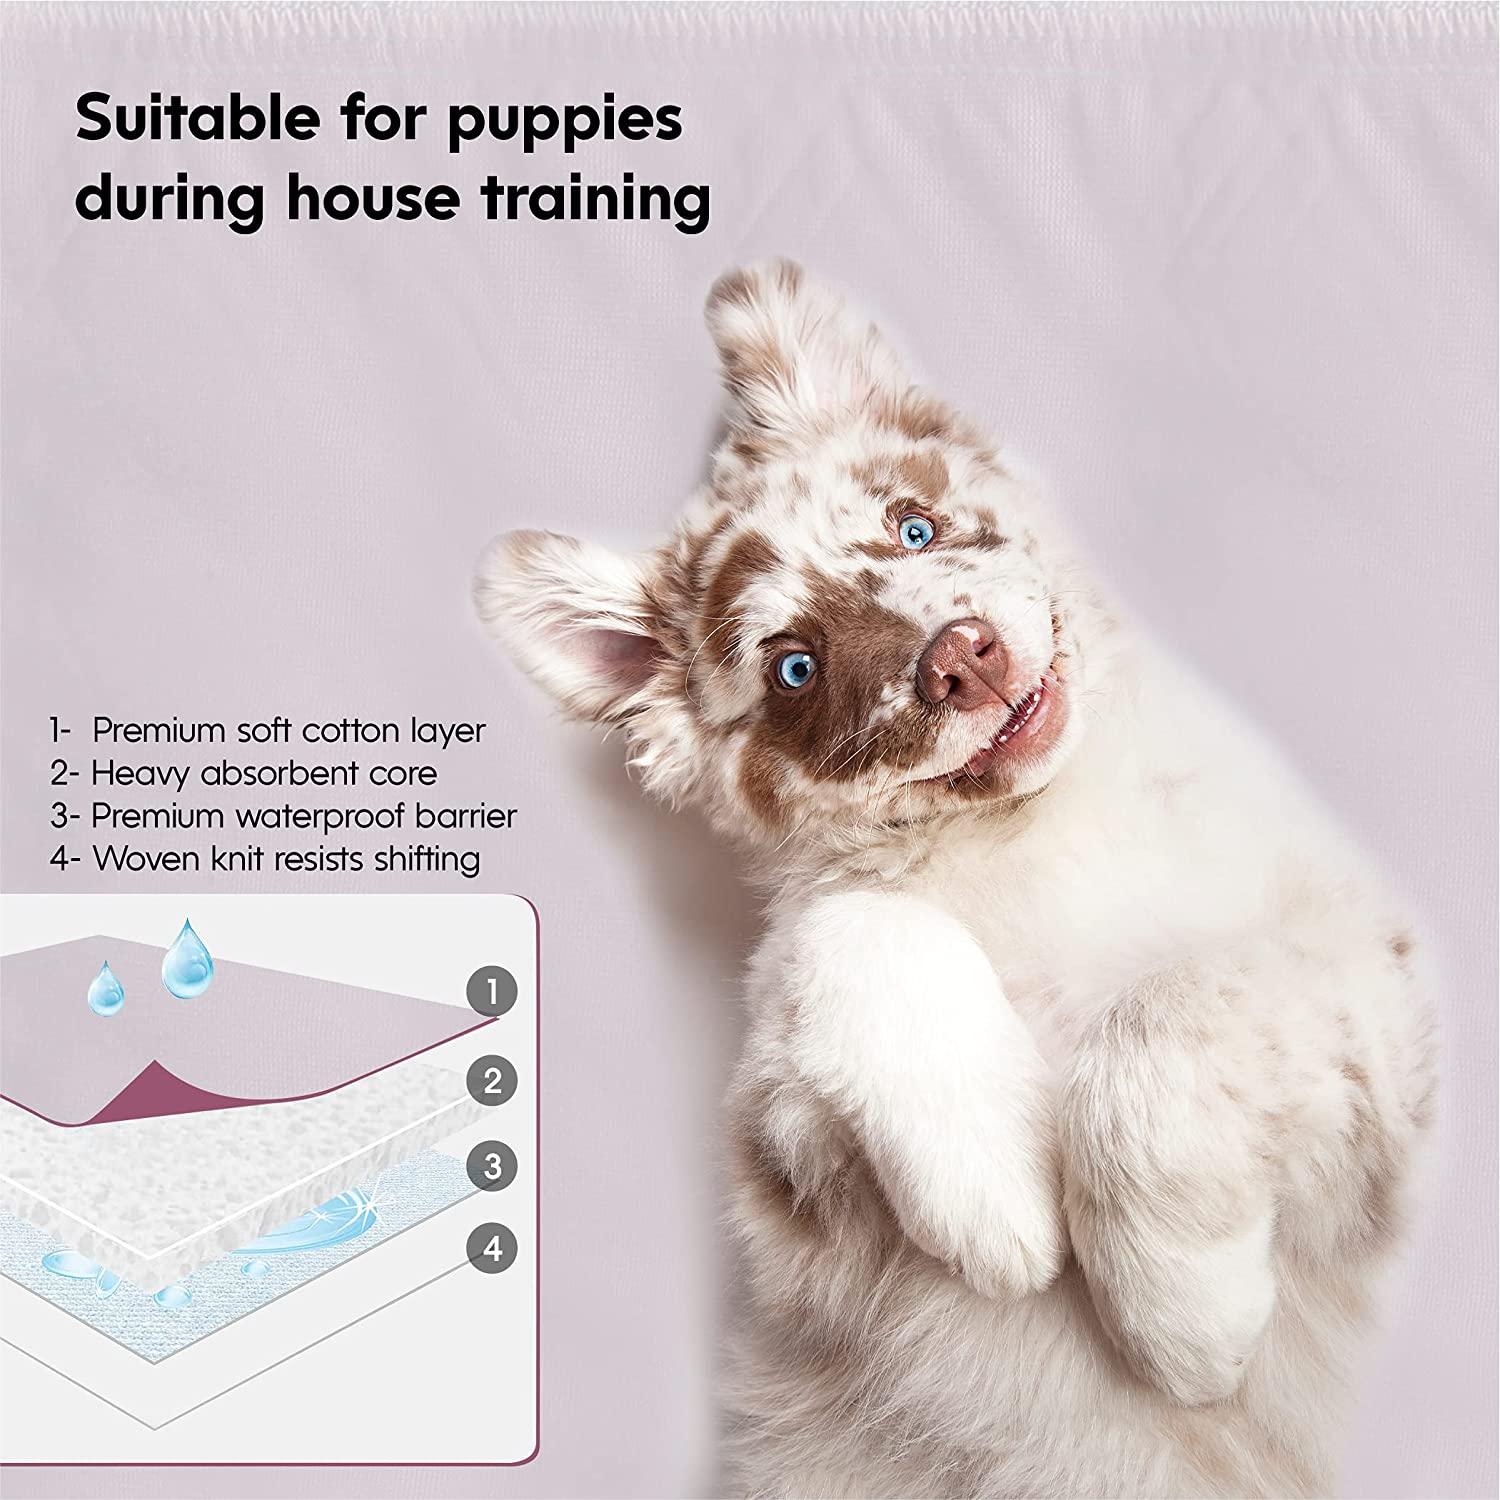  WAVE Washable Reusable Incontinence Bed Pads, Heavy Absorbency  Waterproof Large 34 x 36 Pads For Kids, Adults, Elderly, Pets, Cats,  Bunny, Sofa, Couch, Floor, Made in The USA - 34W x